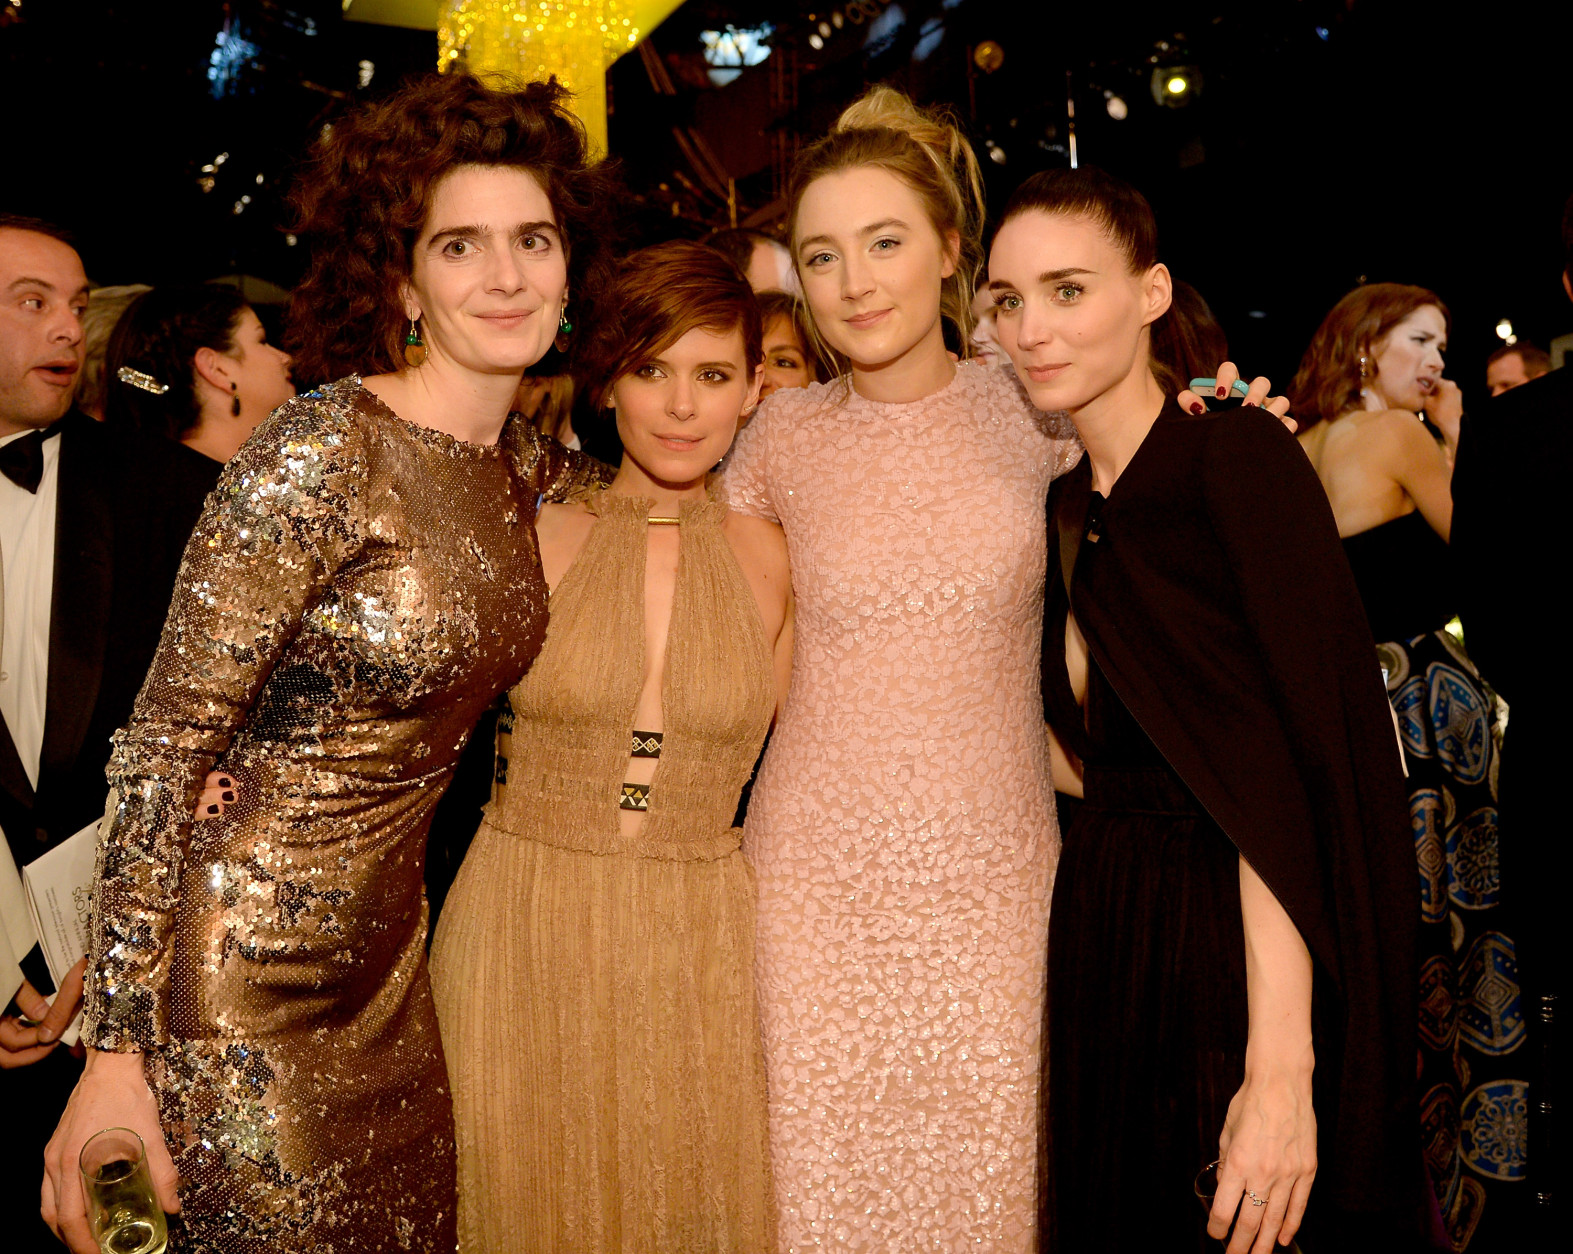 LOS ANGELES, CA - JANUARY 30:  (L-R) Actresses Gaby Hoffmann, Kate Mara, Saoirse Ronan and Rooney Mara pose during the 22nd Annual Screen Actors Guild Awards at The Shrine Auditorium on January 30, 2016 in Los Angeles, California.  (Photo by Kevork Djansezian/Getty Images)